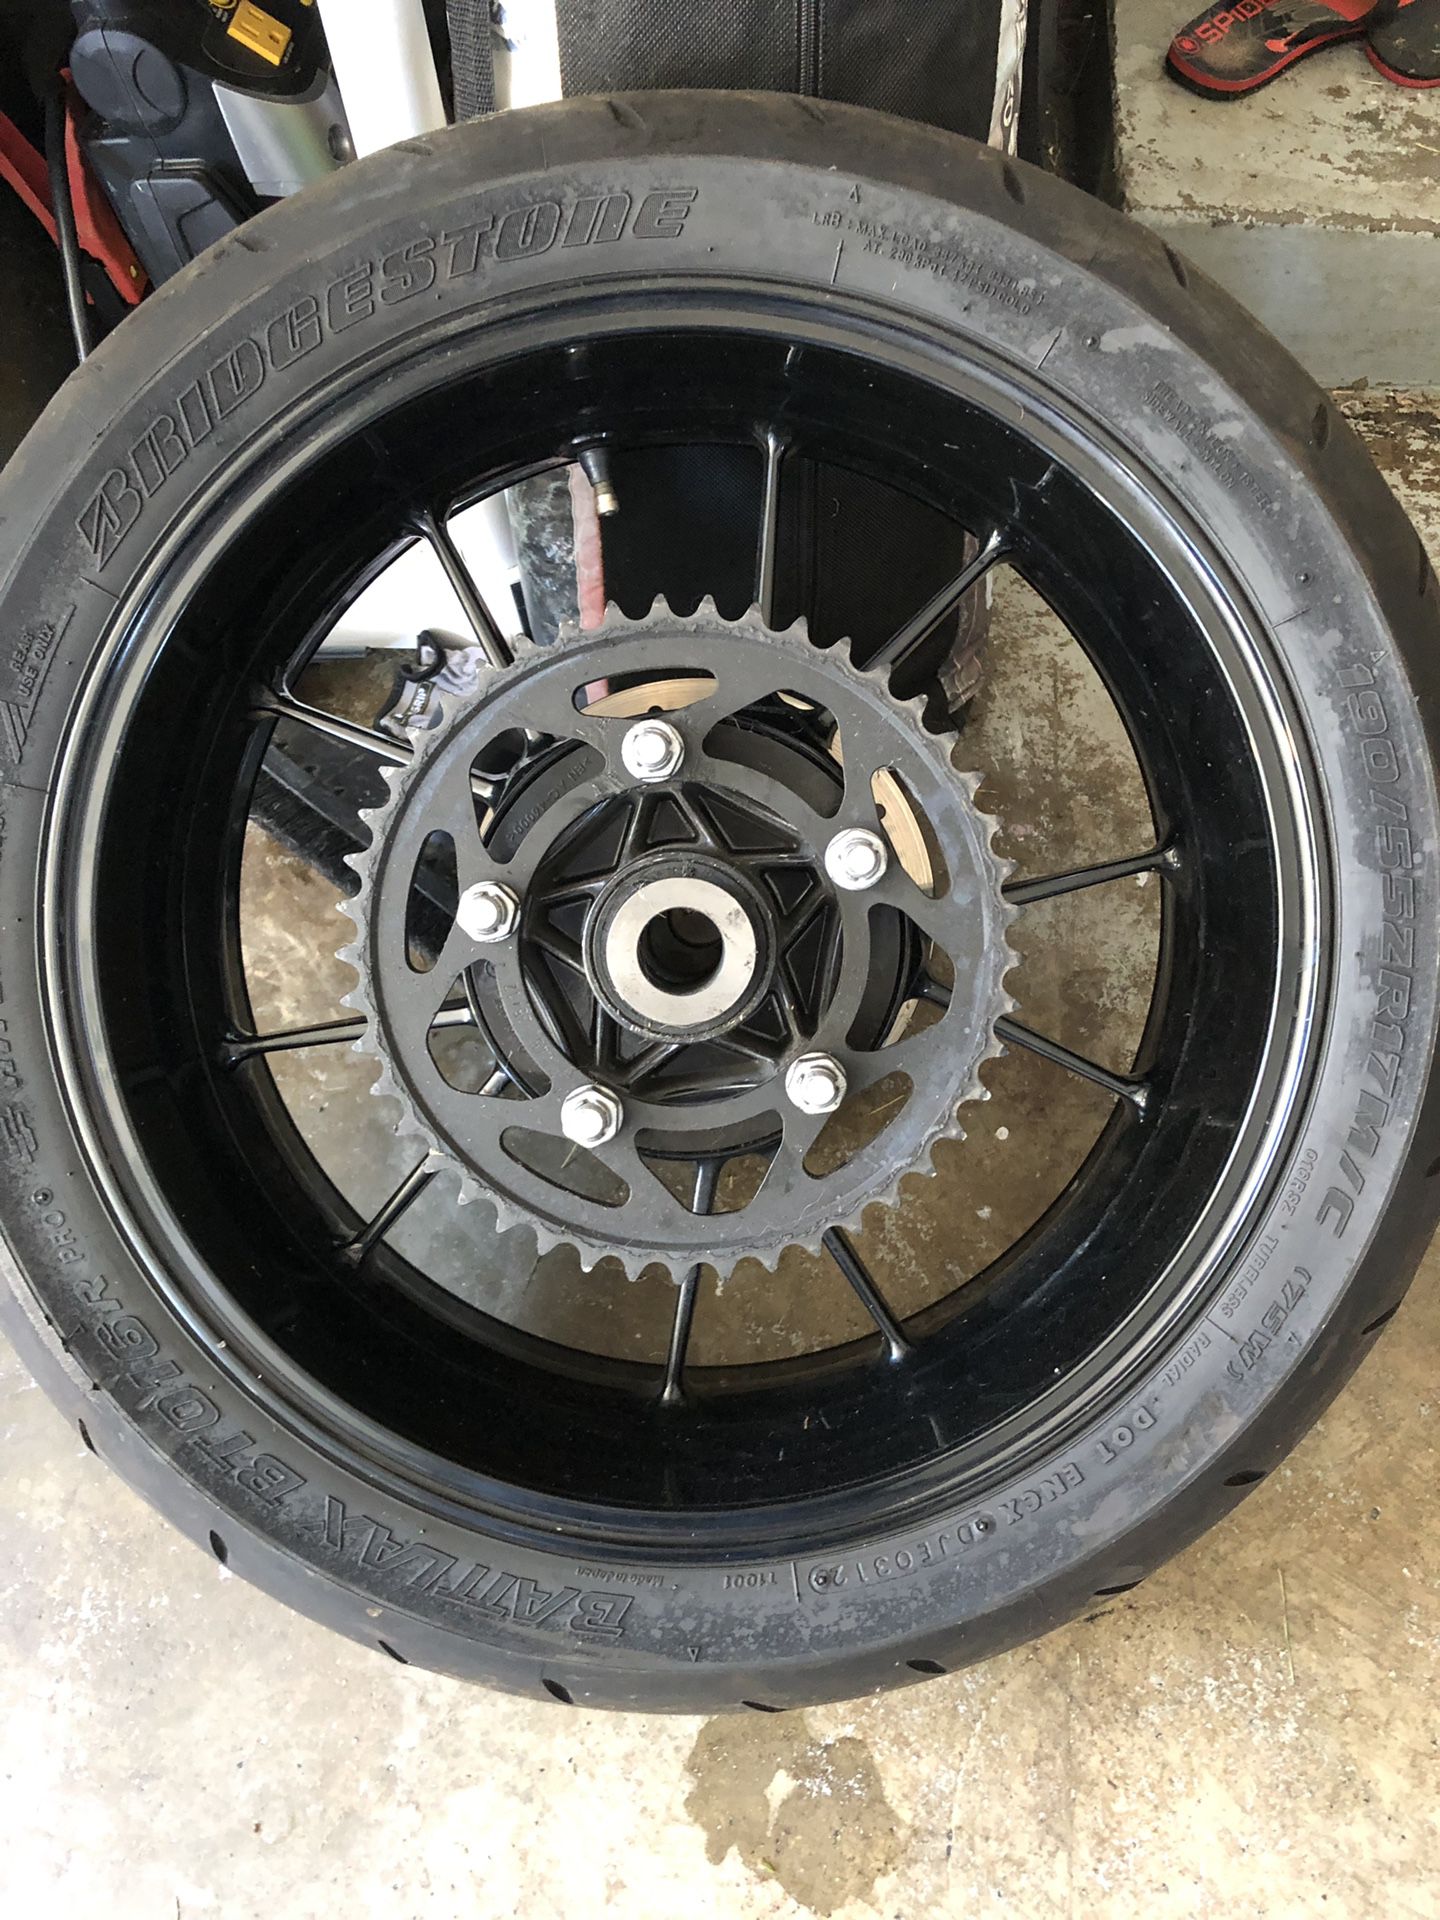 2010-2014 bmw s100rr rear rim with rotor and sprocket